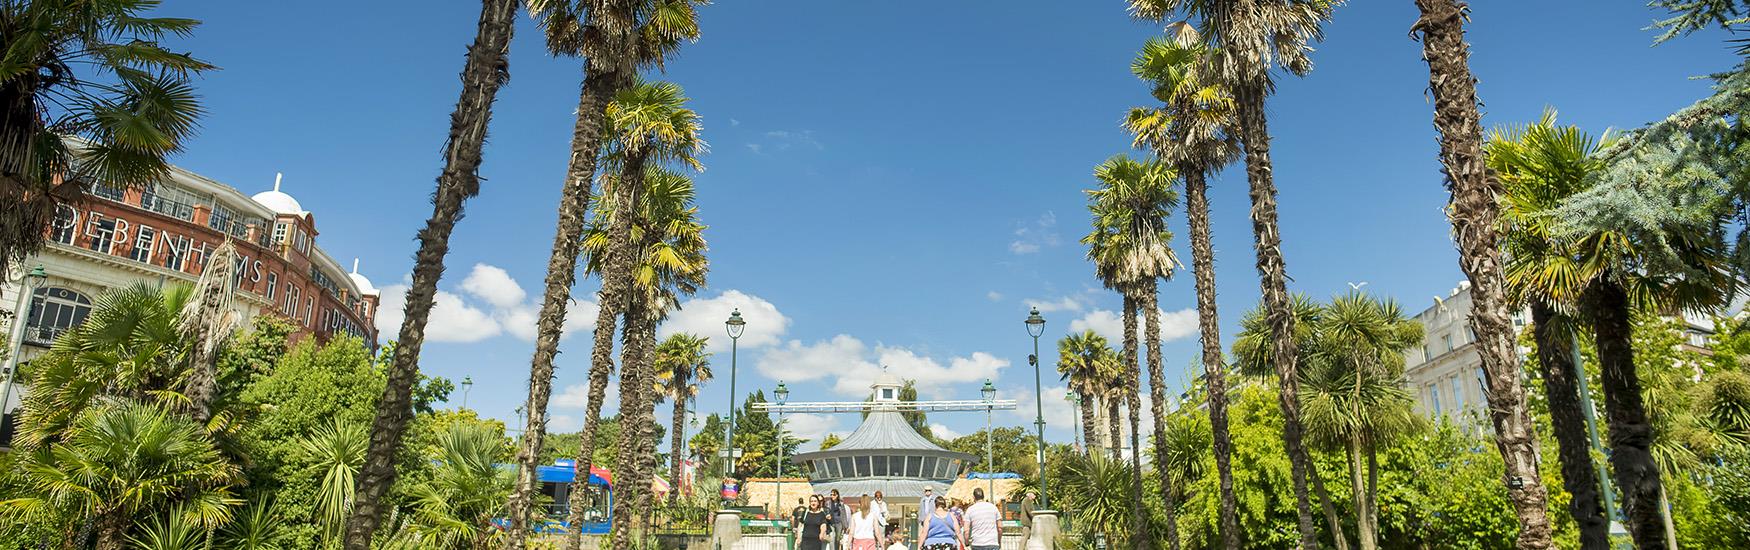 Visitors enjoying a stroll through the palm trees at Bournemouth's lower gardens in Spring time